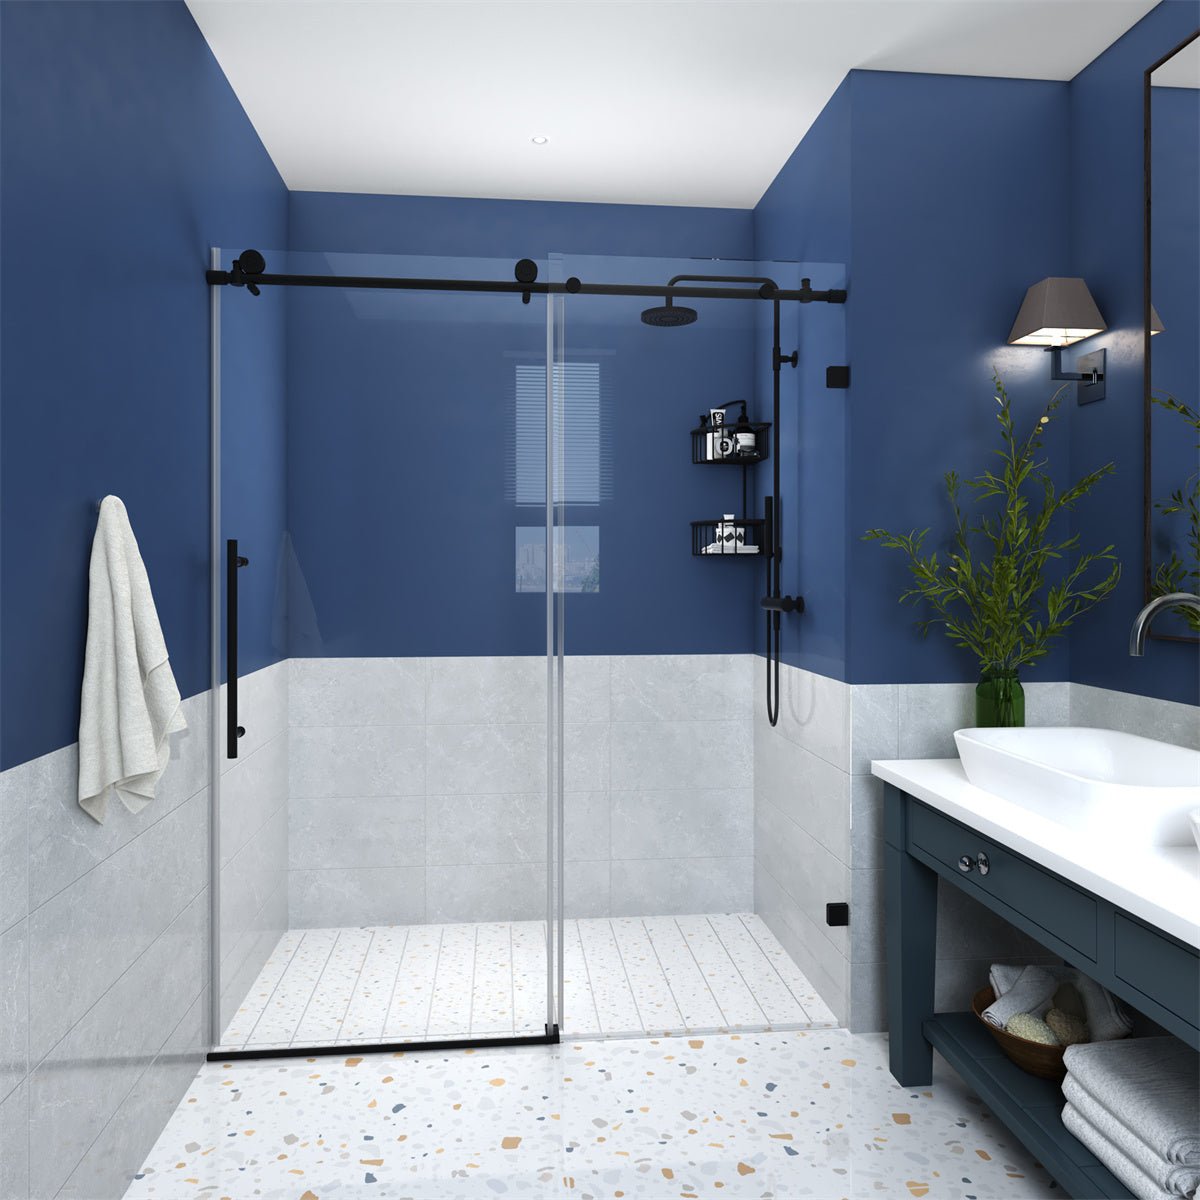 Glide 56-60 in. W x 74 in. H Frameless Tall Shower Door Sliding Walk-in Shower Design with 5/16 in.thick Clear Glass